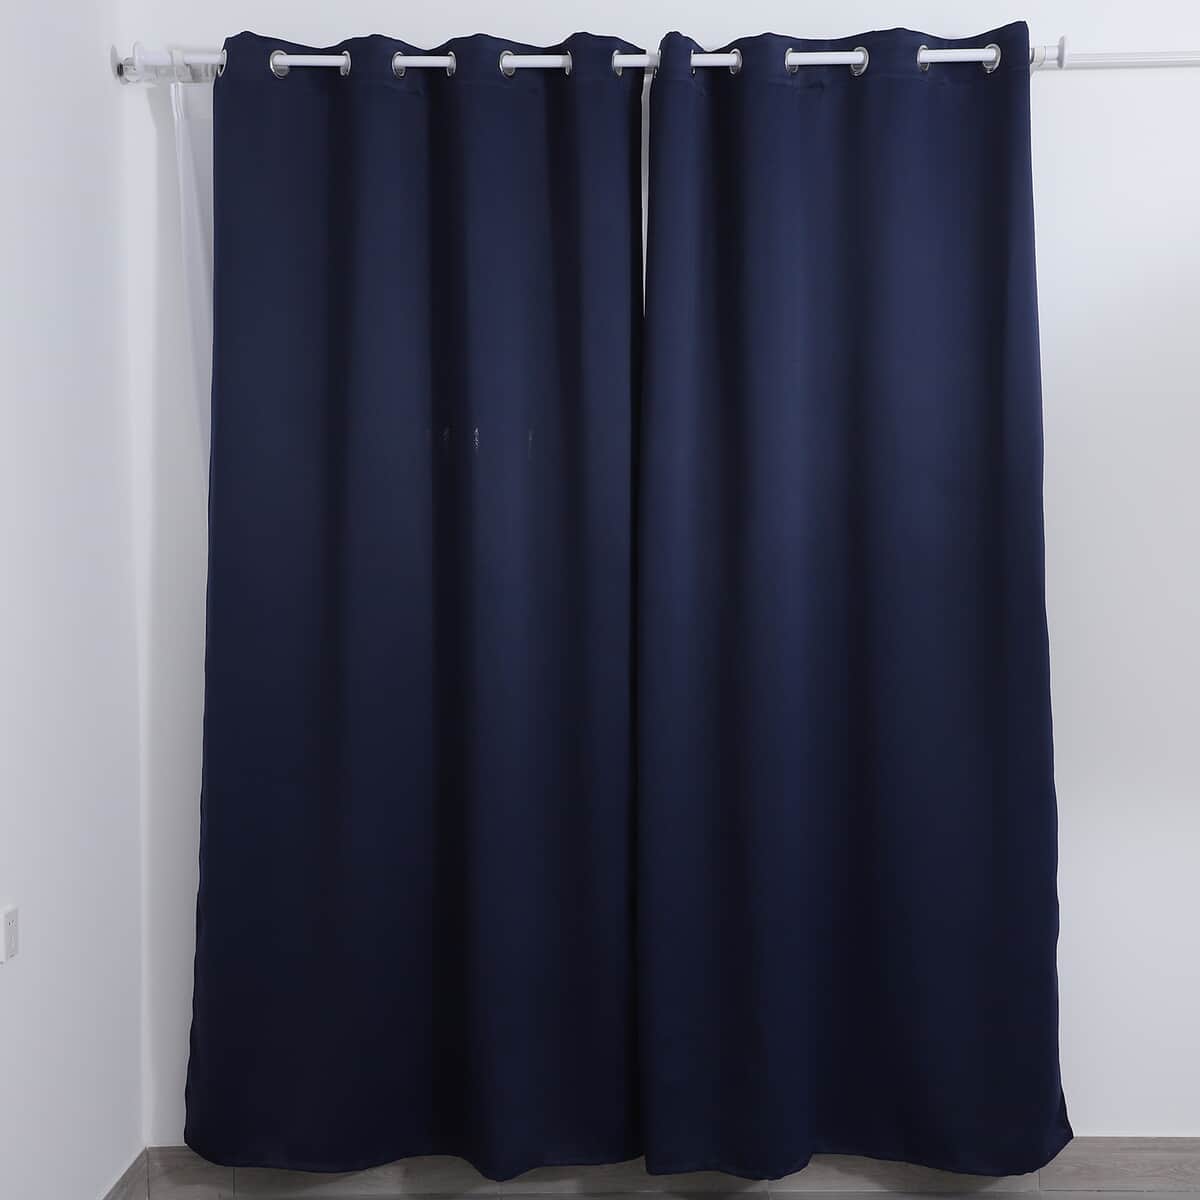 Set of 2 Navy Blue Solid Blackout Curtain with 8 Metal Rings image number 0